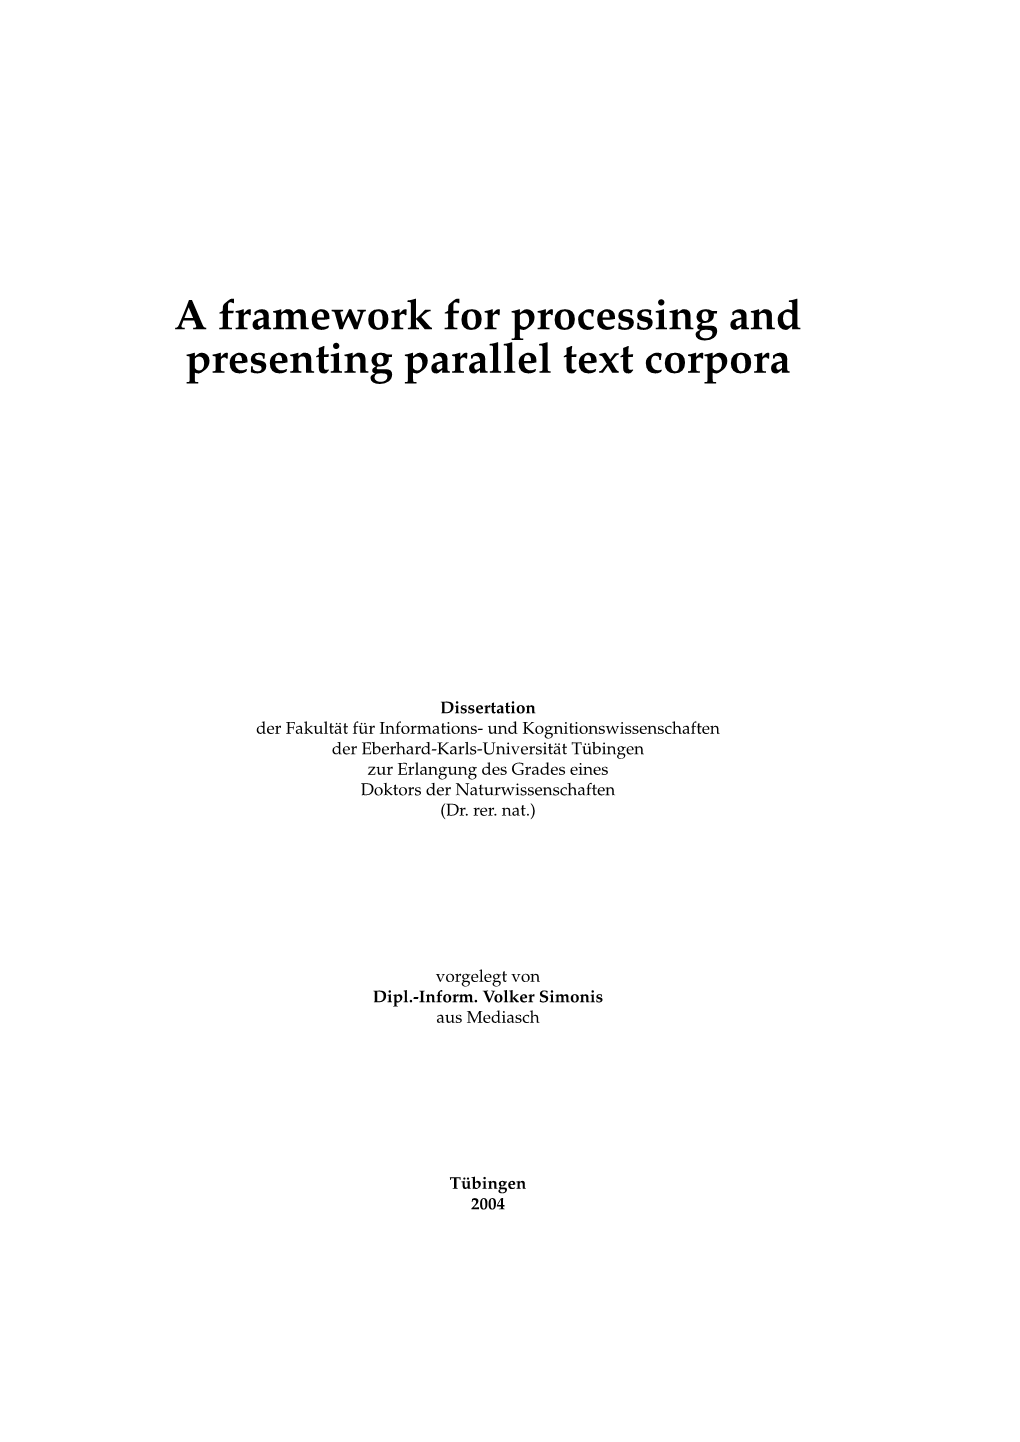 A Framework for Processing and Presenting Parallel Text Corpora